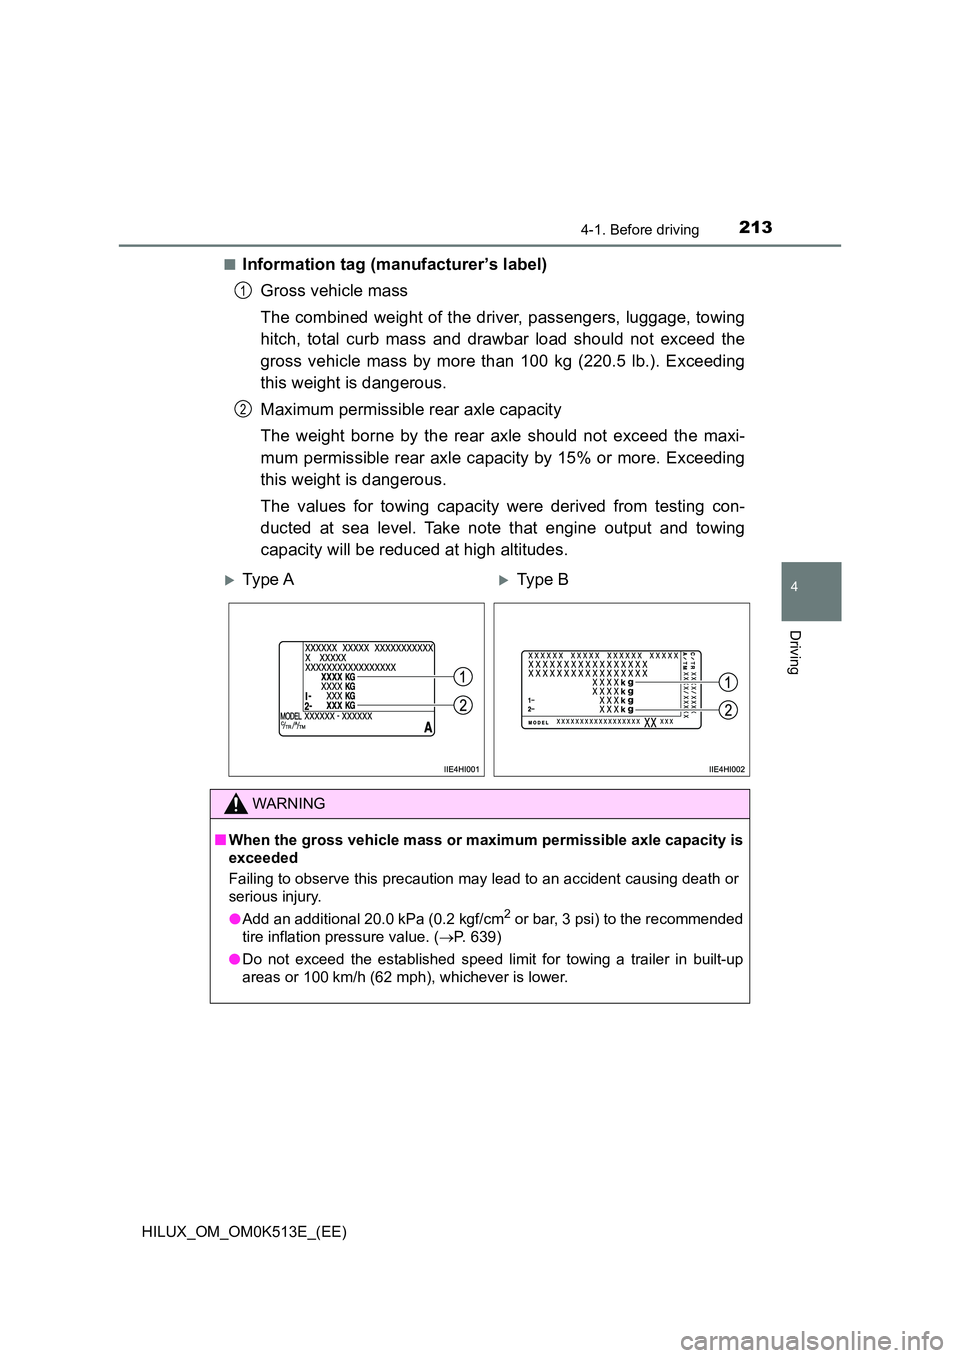 TOYOTA HILUX 2022  Owners Manual 2134-1. Before driving
4
Driving
HILUX_OM_OM0K513E_(EE) 
�QInformation tag (manufacturer’s label) 
Gross vehicle mass 
The combined weight of the driver, passengers, luggage, towing 
hitch, total cu